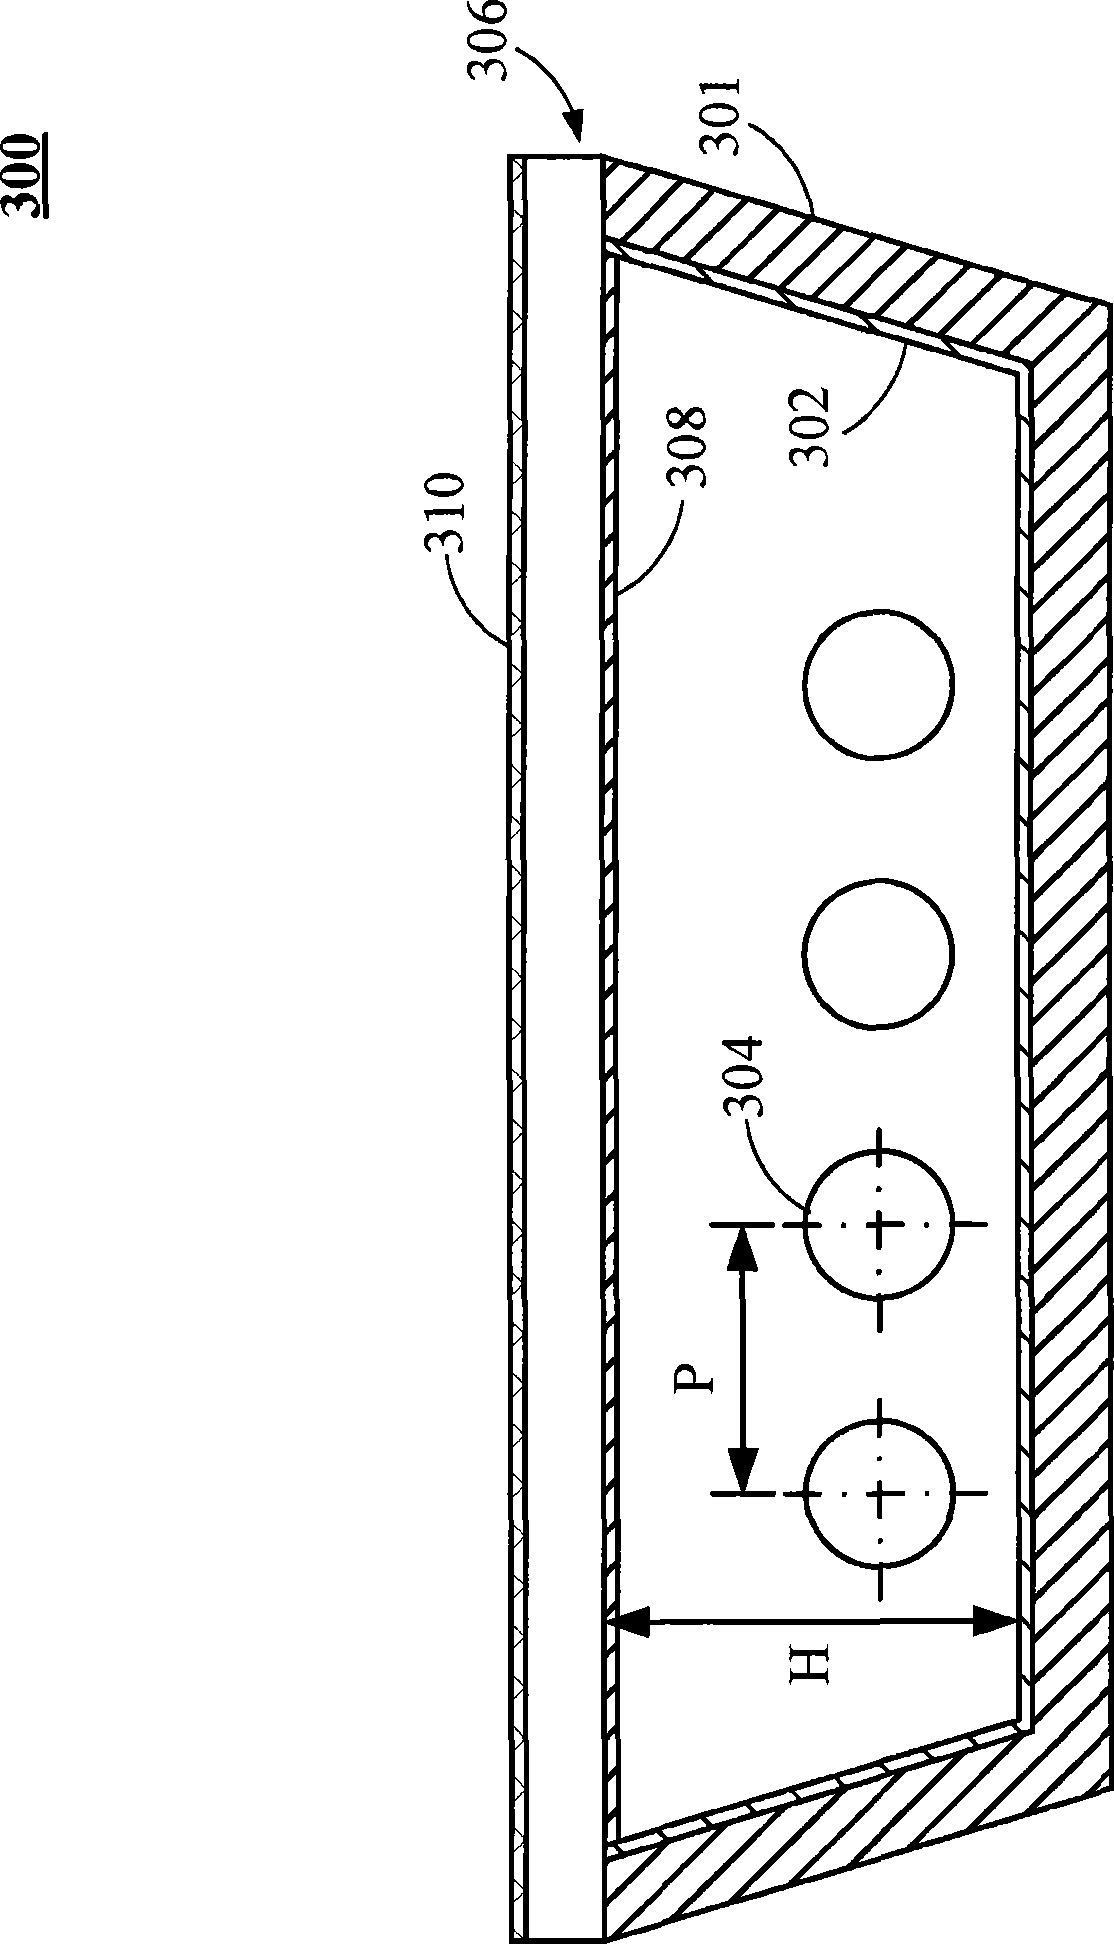 Backlight module with stipple pattern and its diffusing plate structure